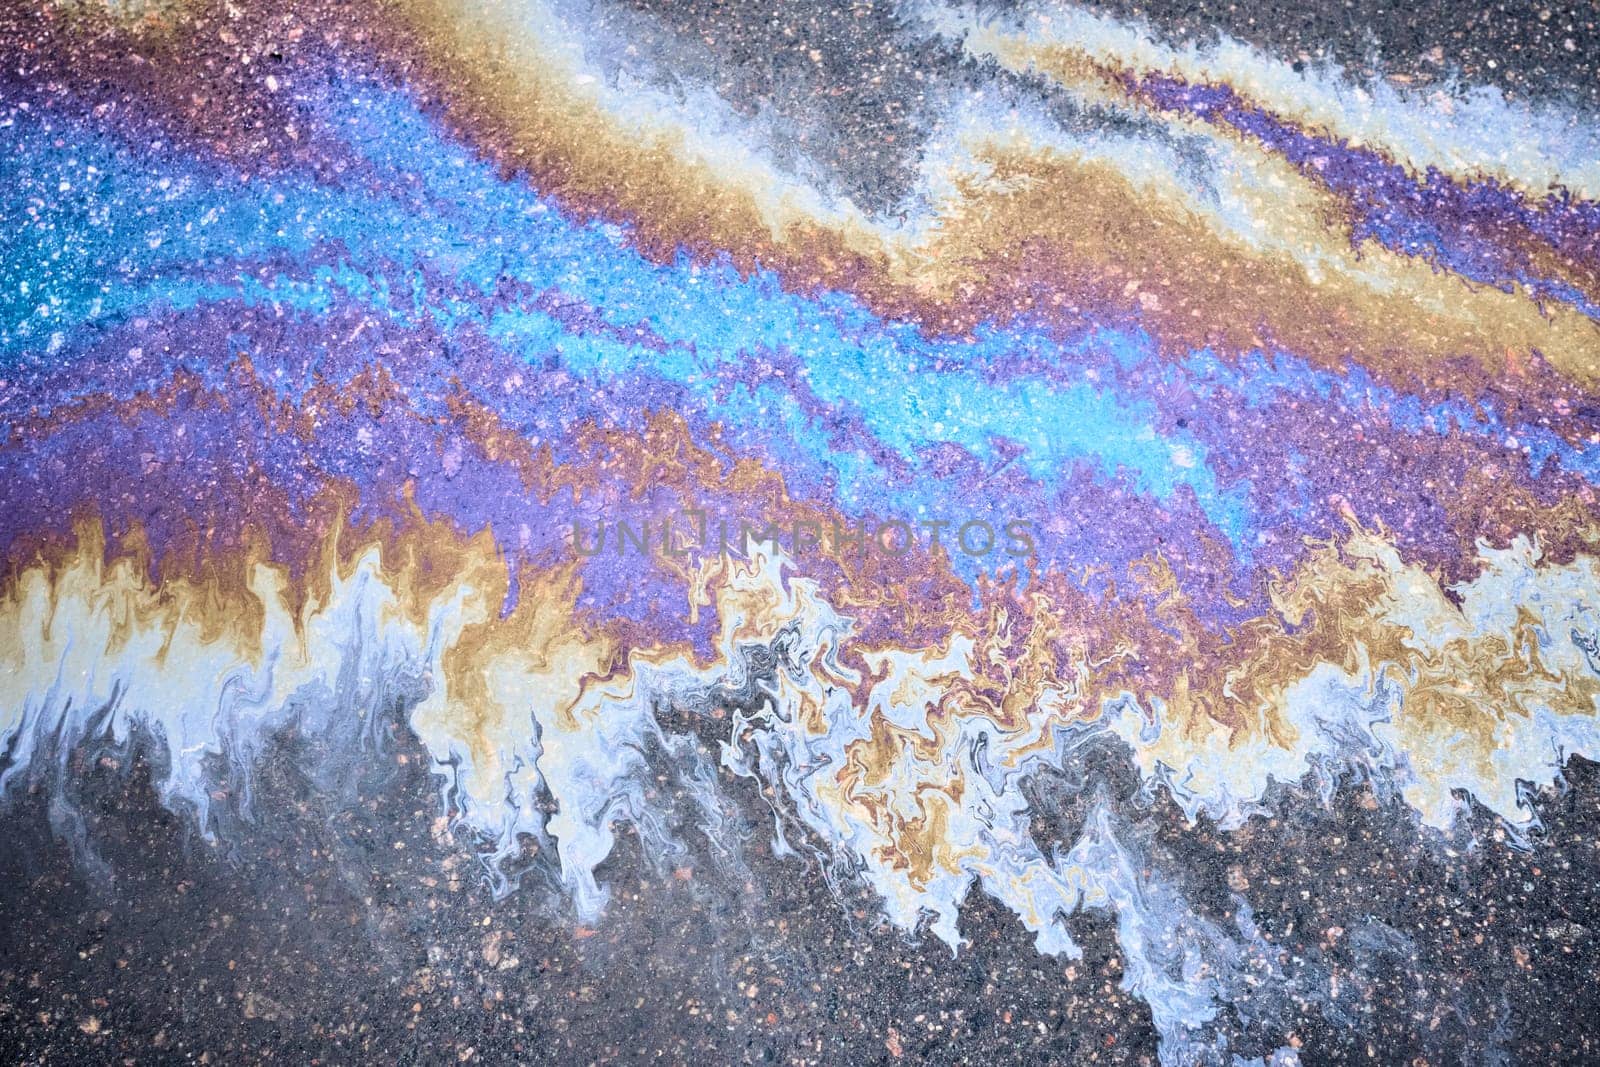 Oil stain, Gas Stain drop from the Car on the Parking Lot Floor.